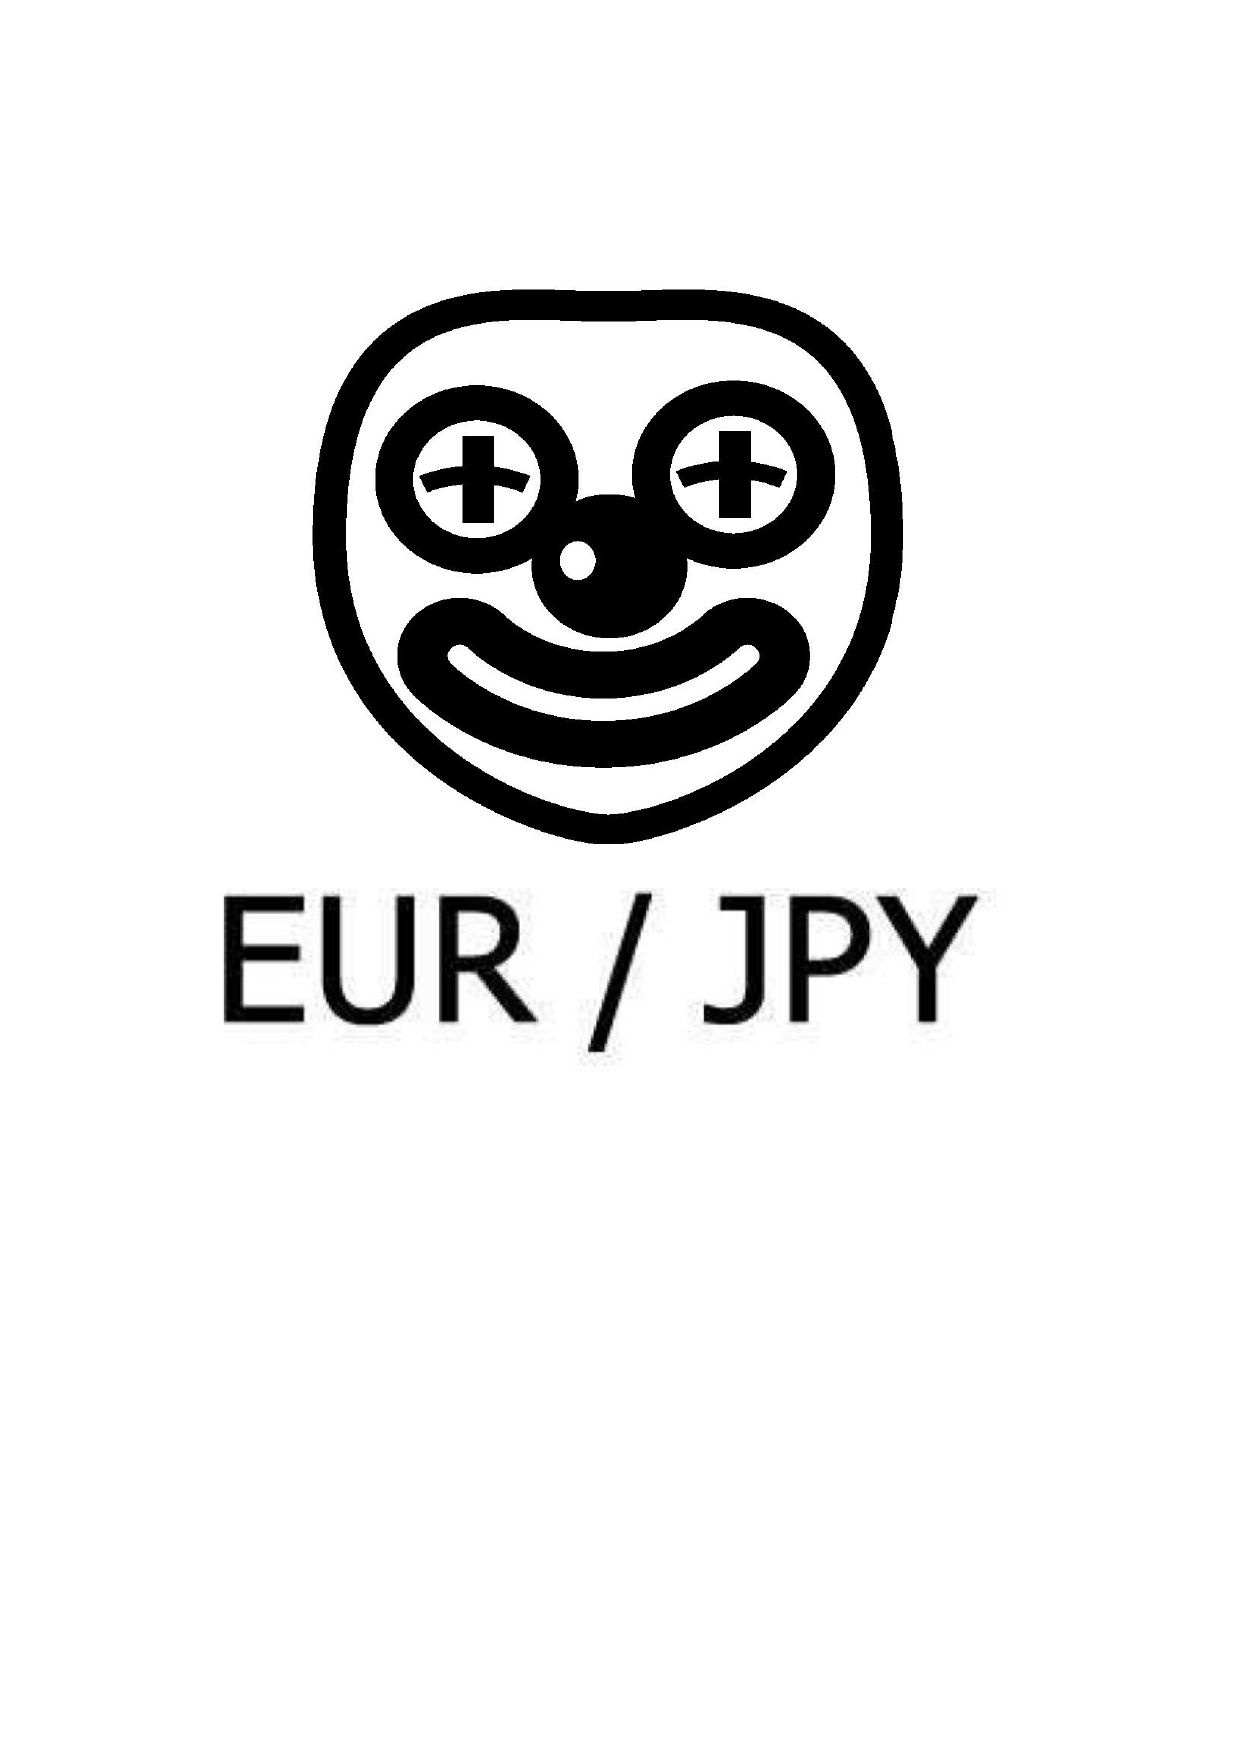 eur_jpy M30 majic system Auto Trading